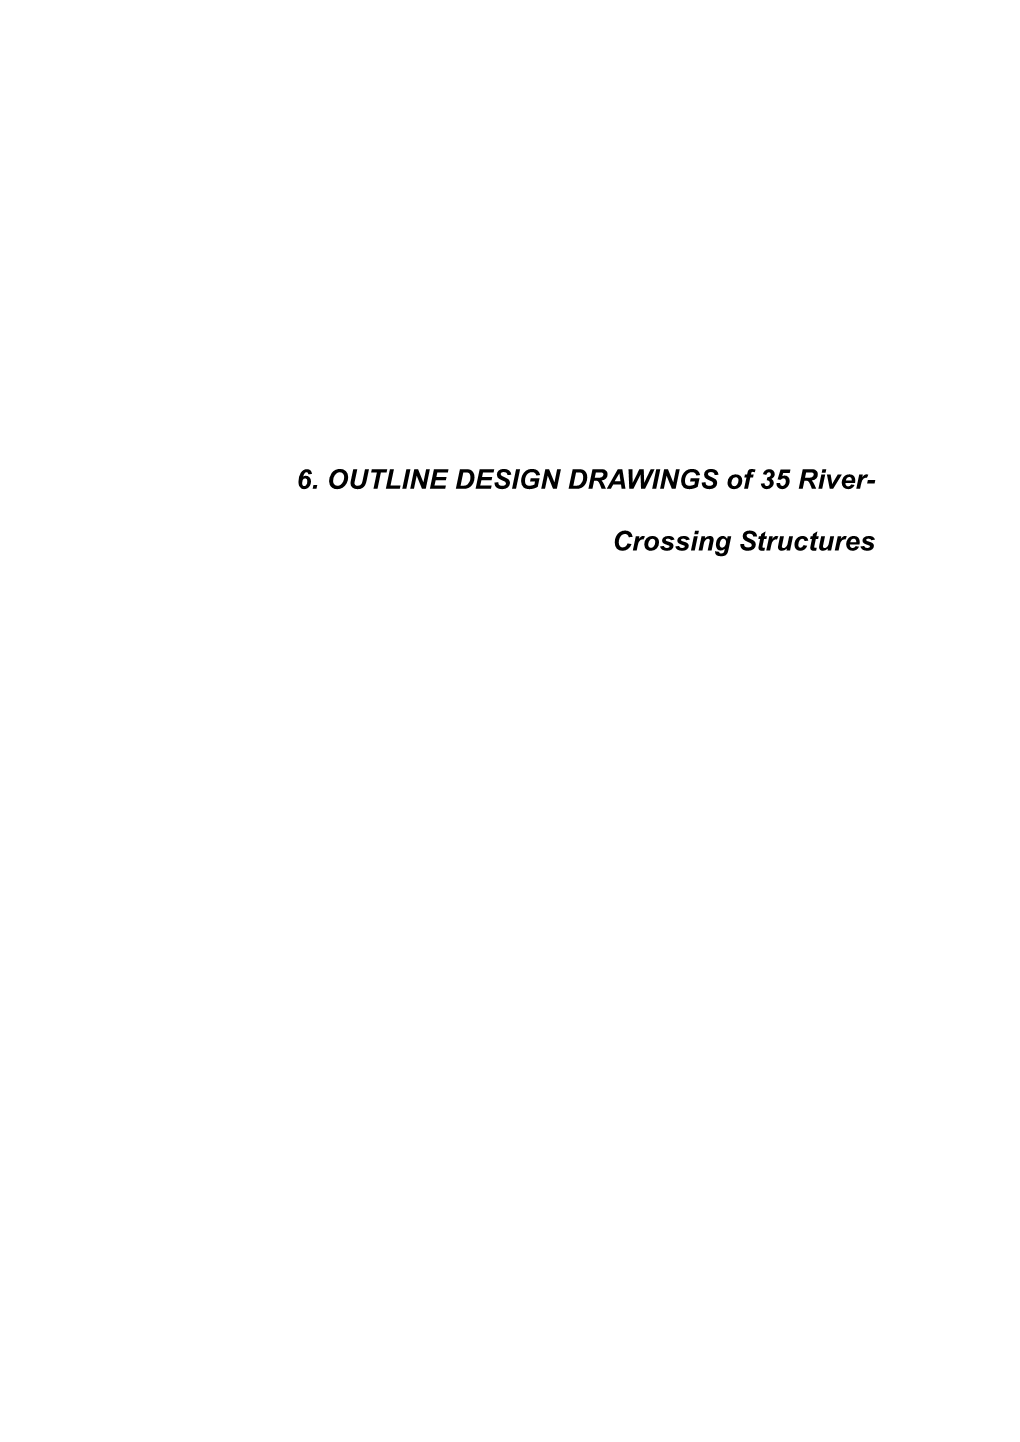 6. OUTLINE DESIGN DRAWINGS of 35 River- Crossing Structures